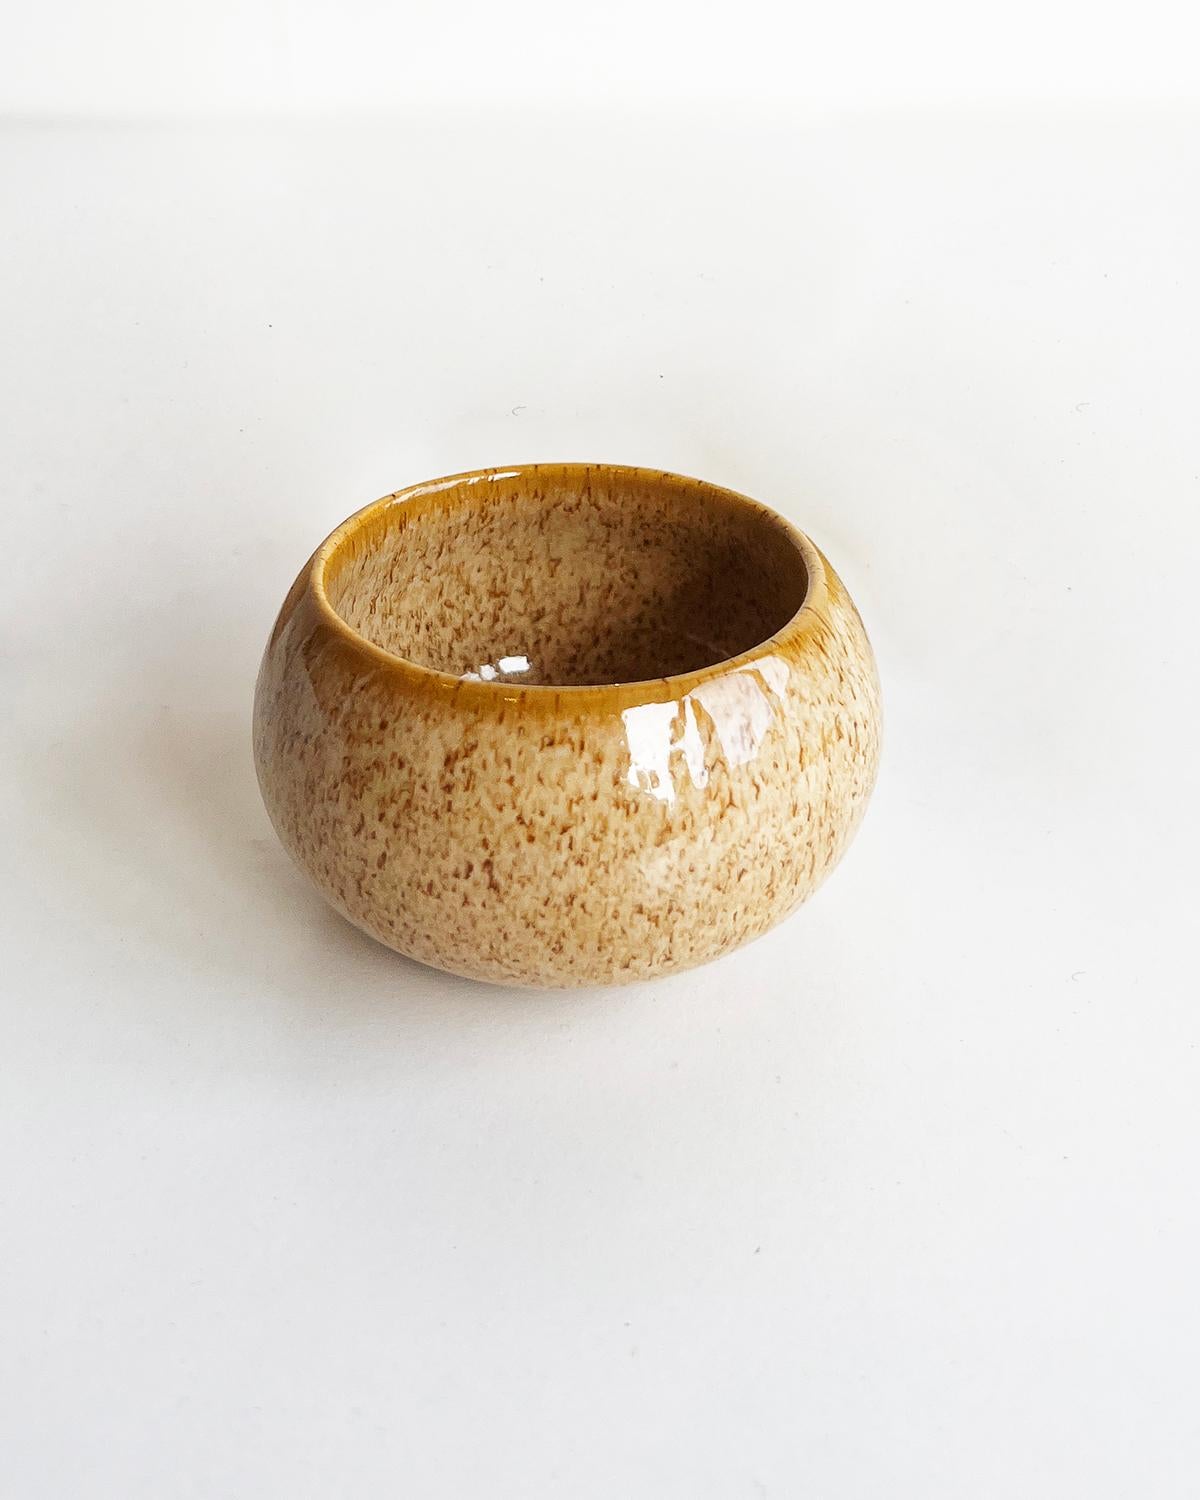 The perfect cups for sipping your favorite Mezcal. These handmade stoneware mezcal cups are the perfect addition to any kitchen or bar. Made in Mexico by skilled artisans, each cup has a unique caramel beige speckled glaze, adding an organic modern